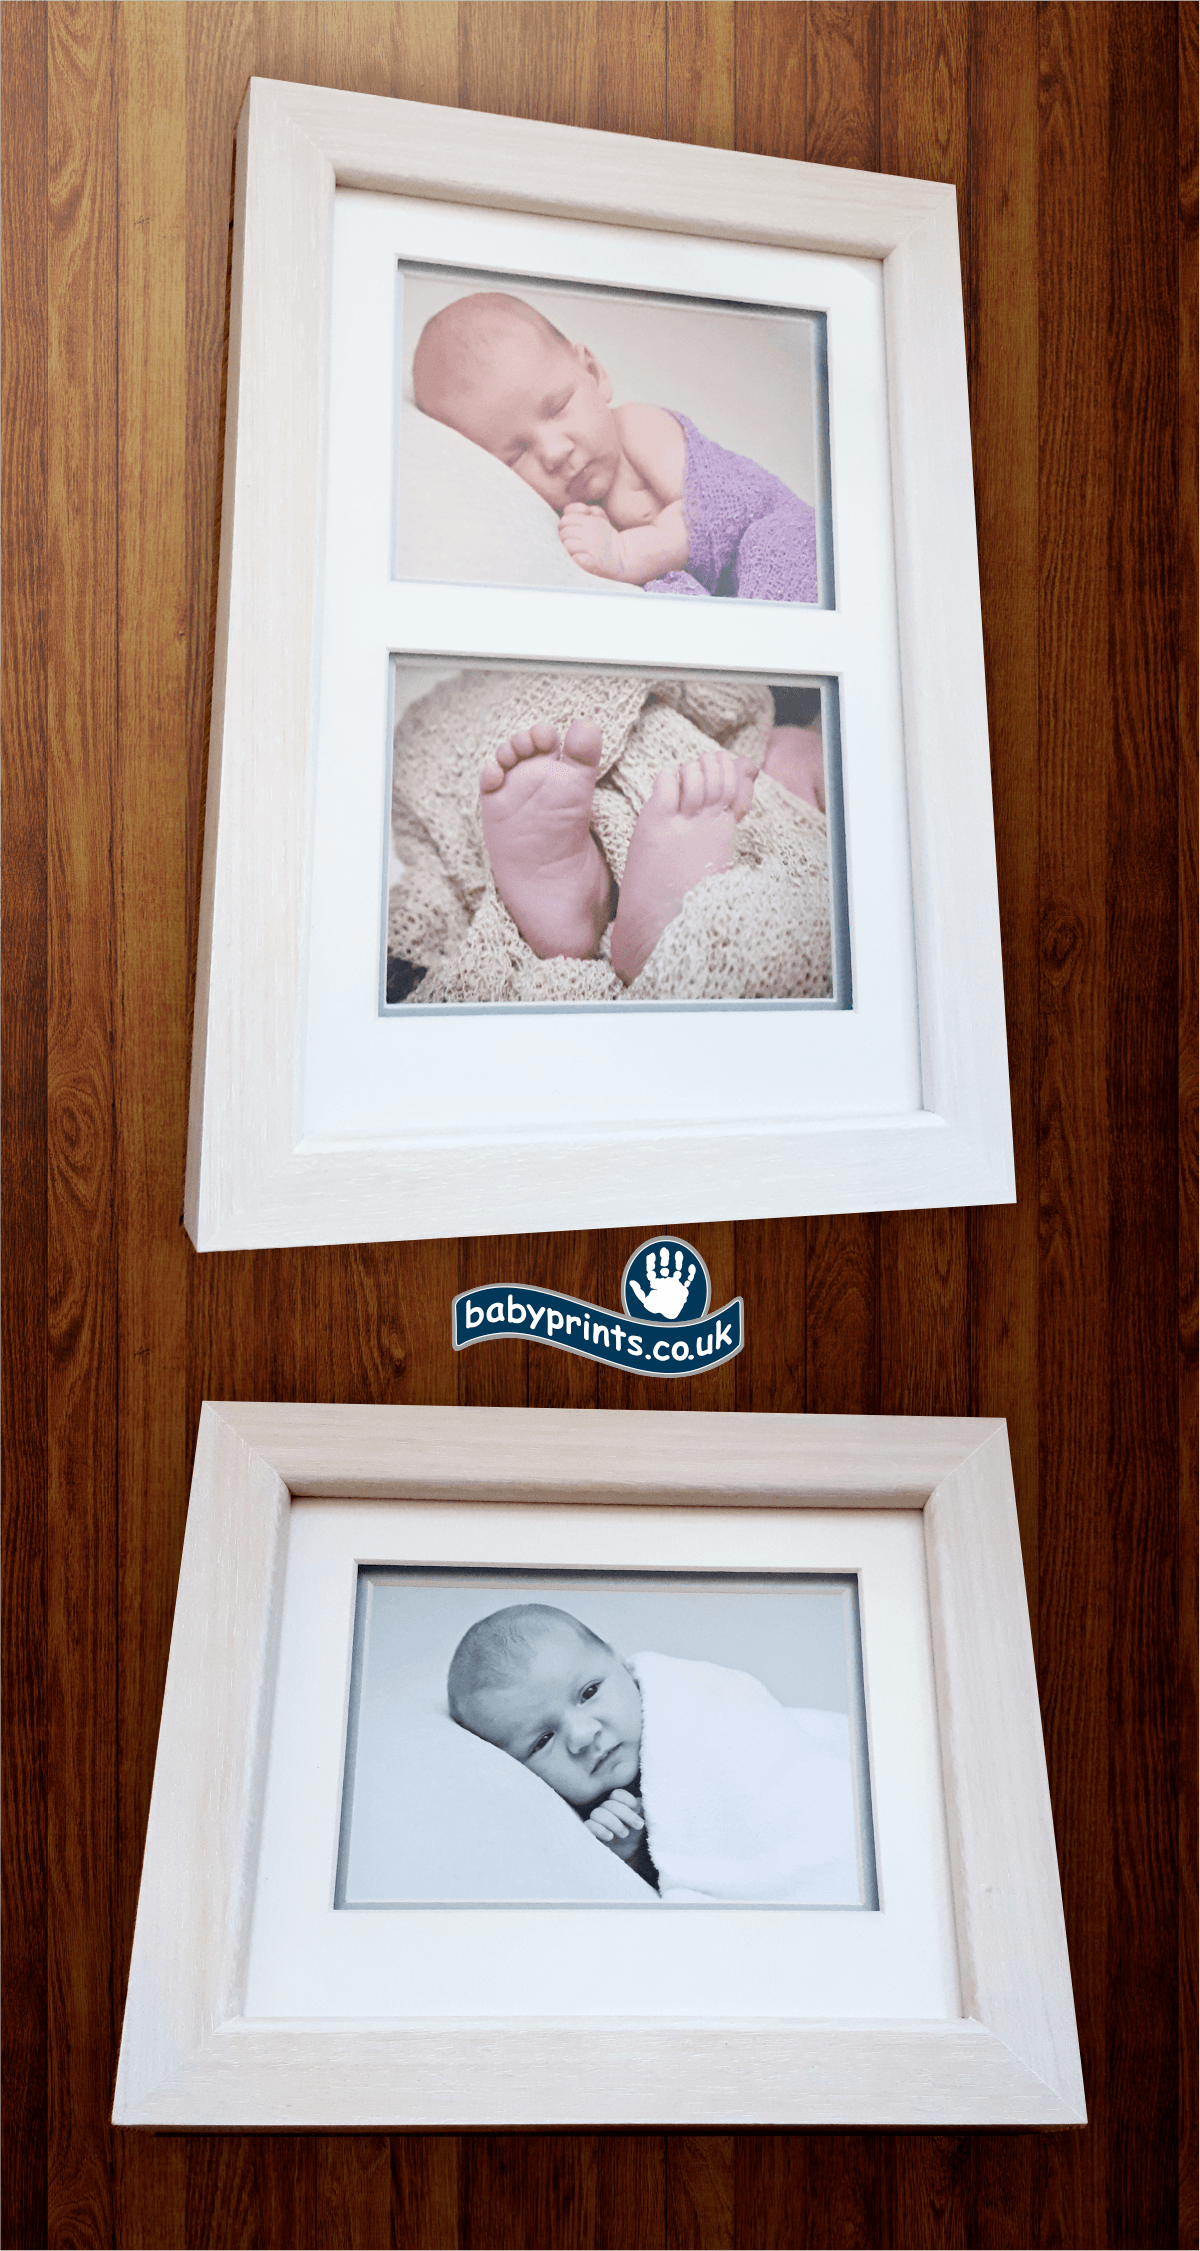 Framed photos from Babyprints